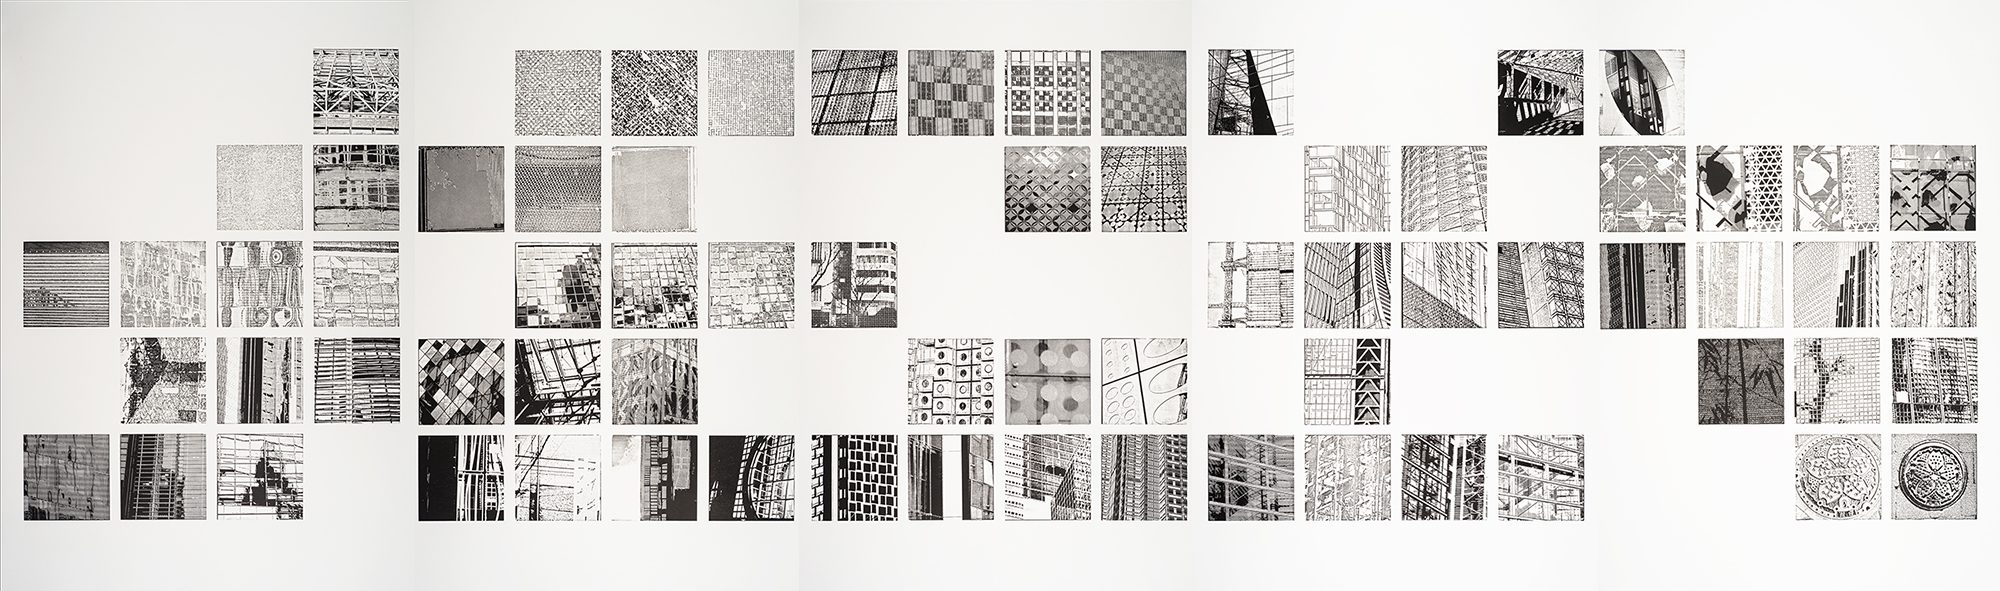 A series of photographs showing different patterns and designs.